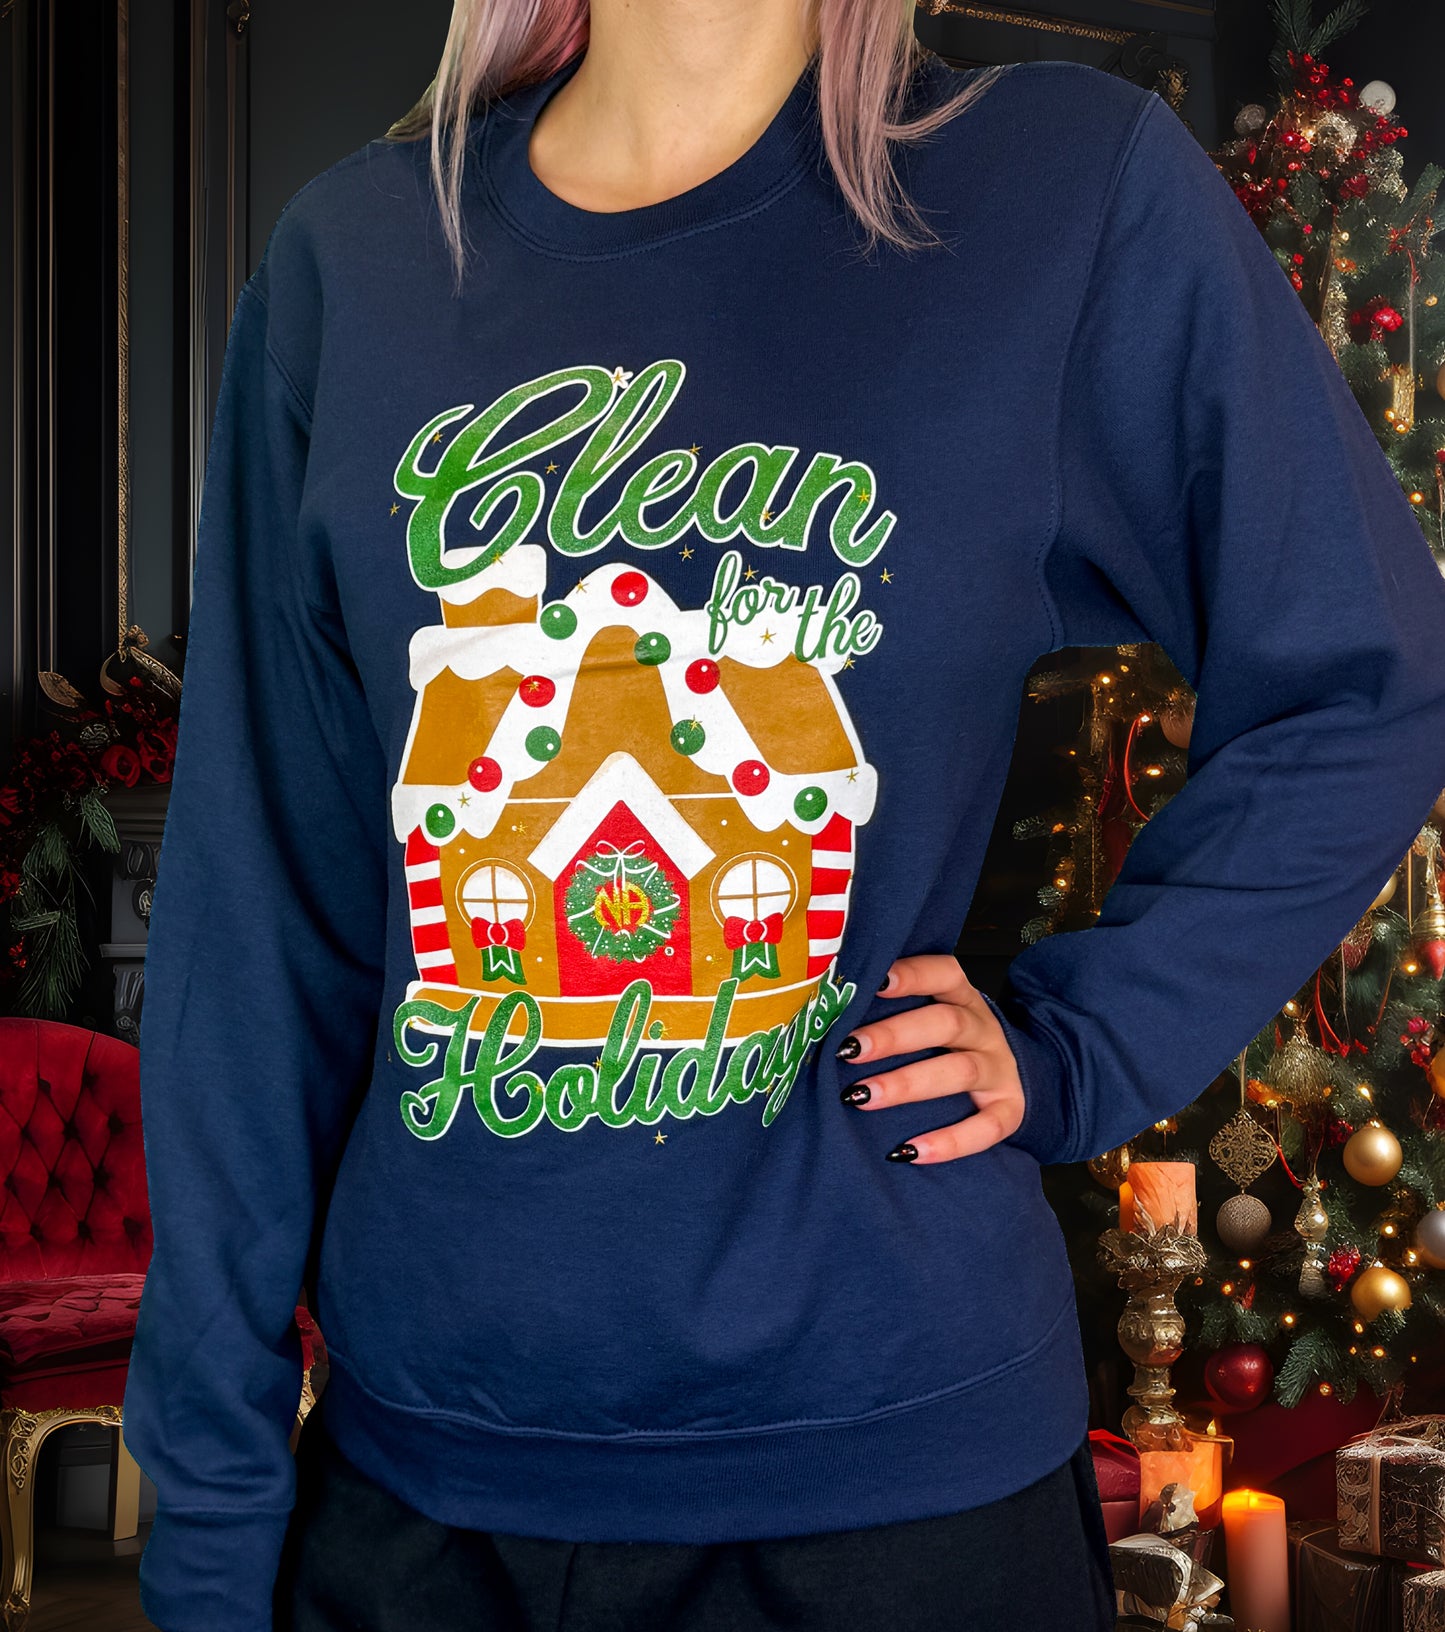 Clean For the Holidays Sweater- With Glitter!